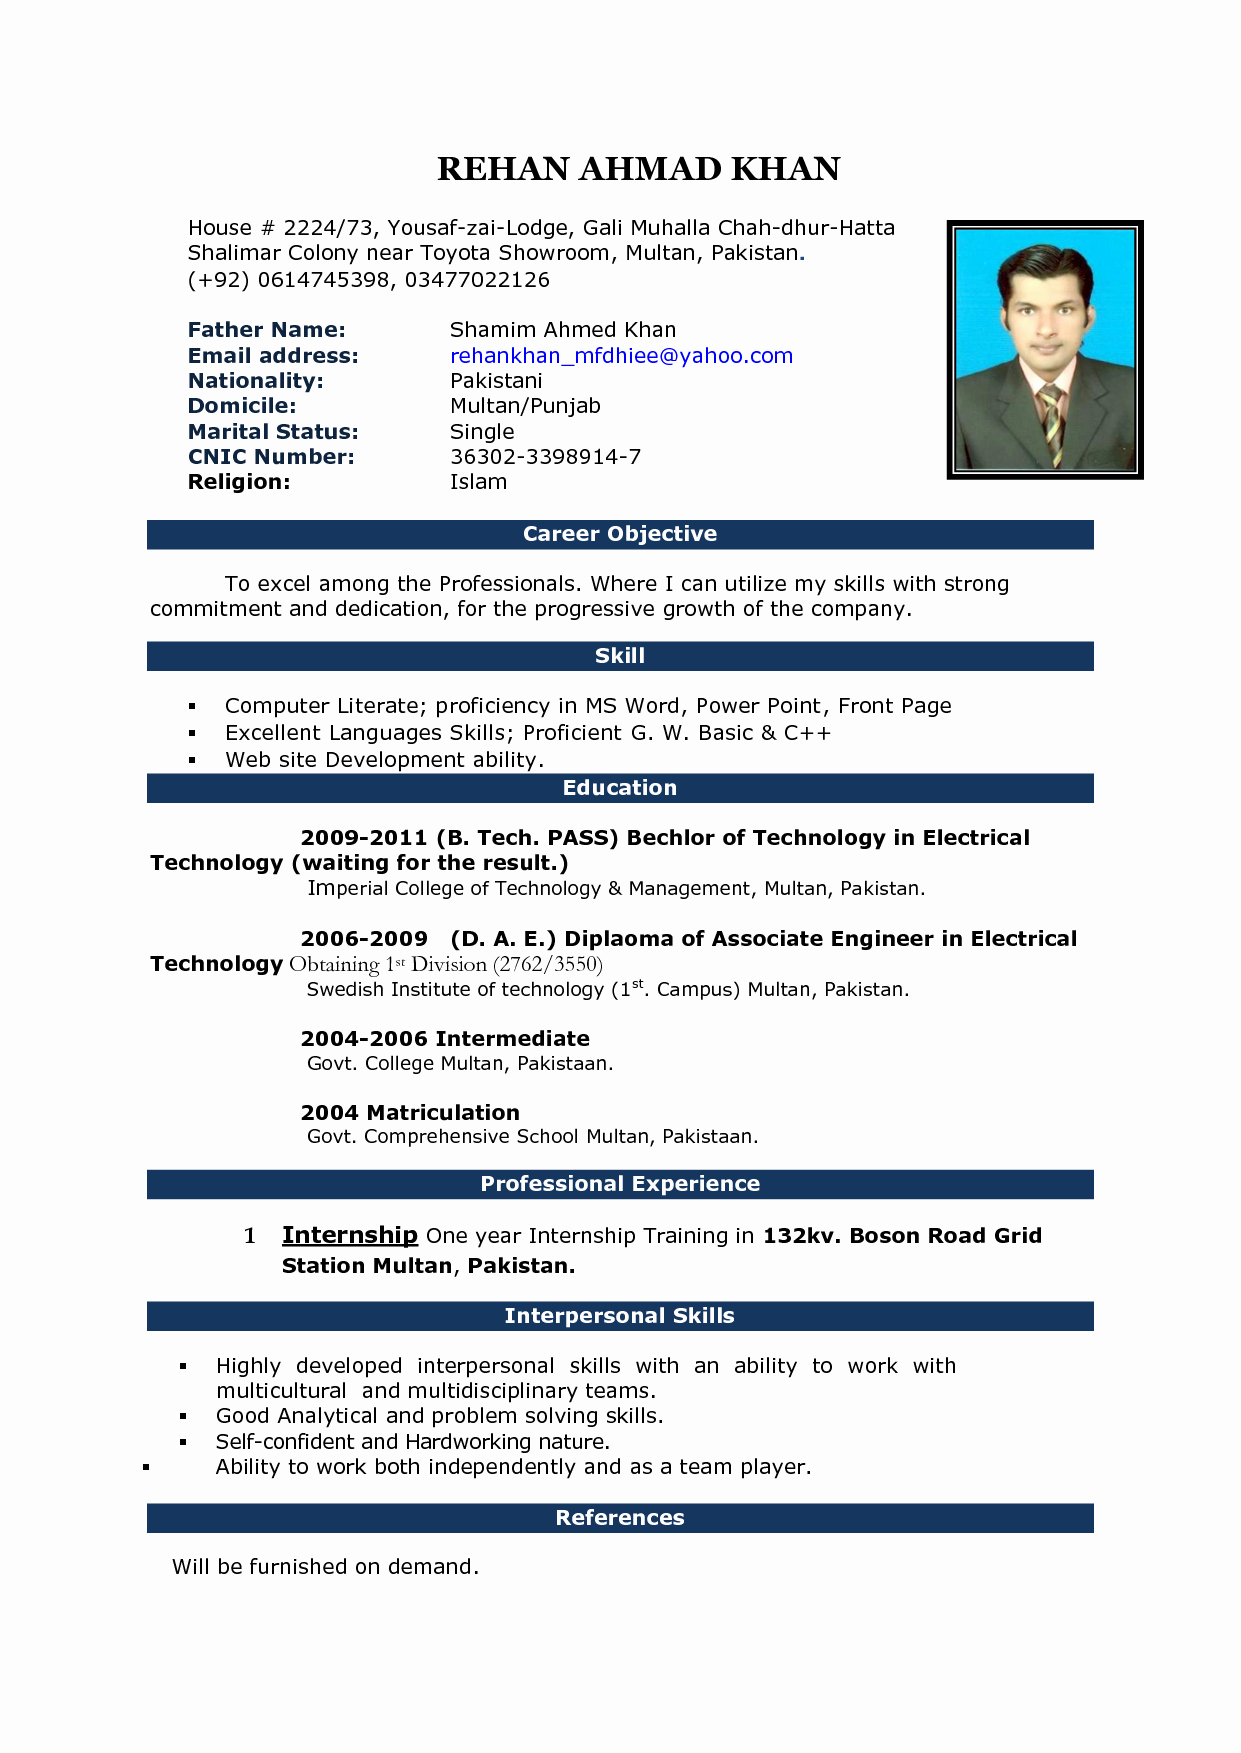 Free Resumes Download Word format Fresh Image Result for Cv format In Ms Word 2007 Free